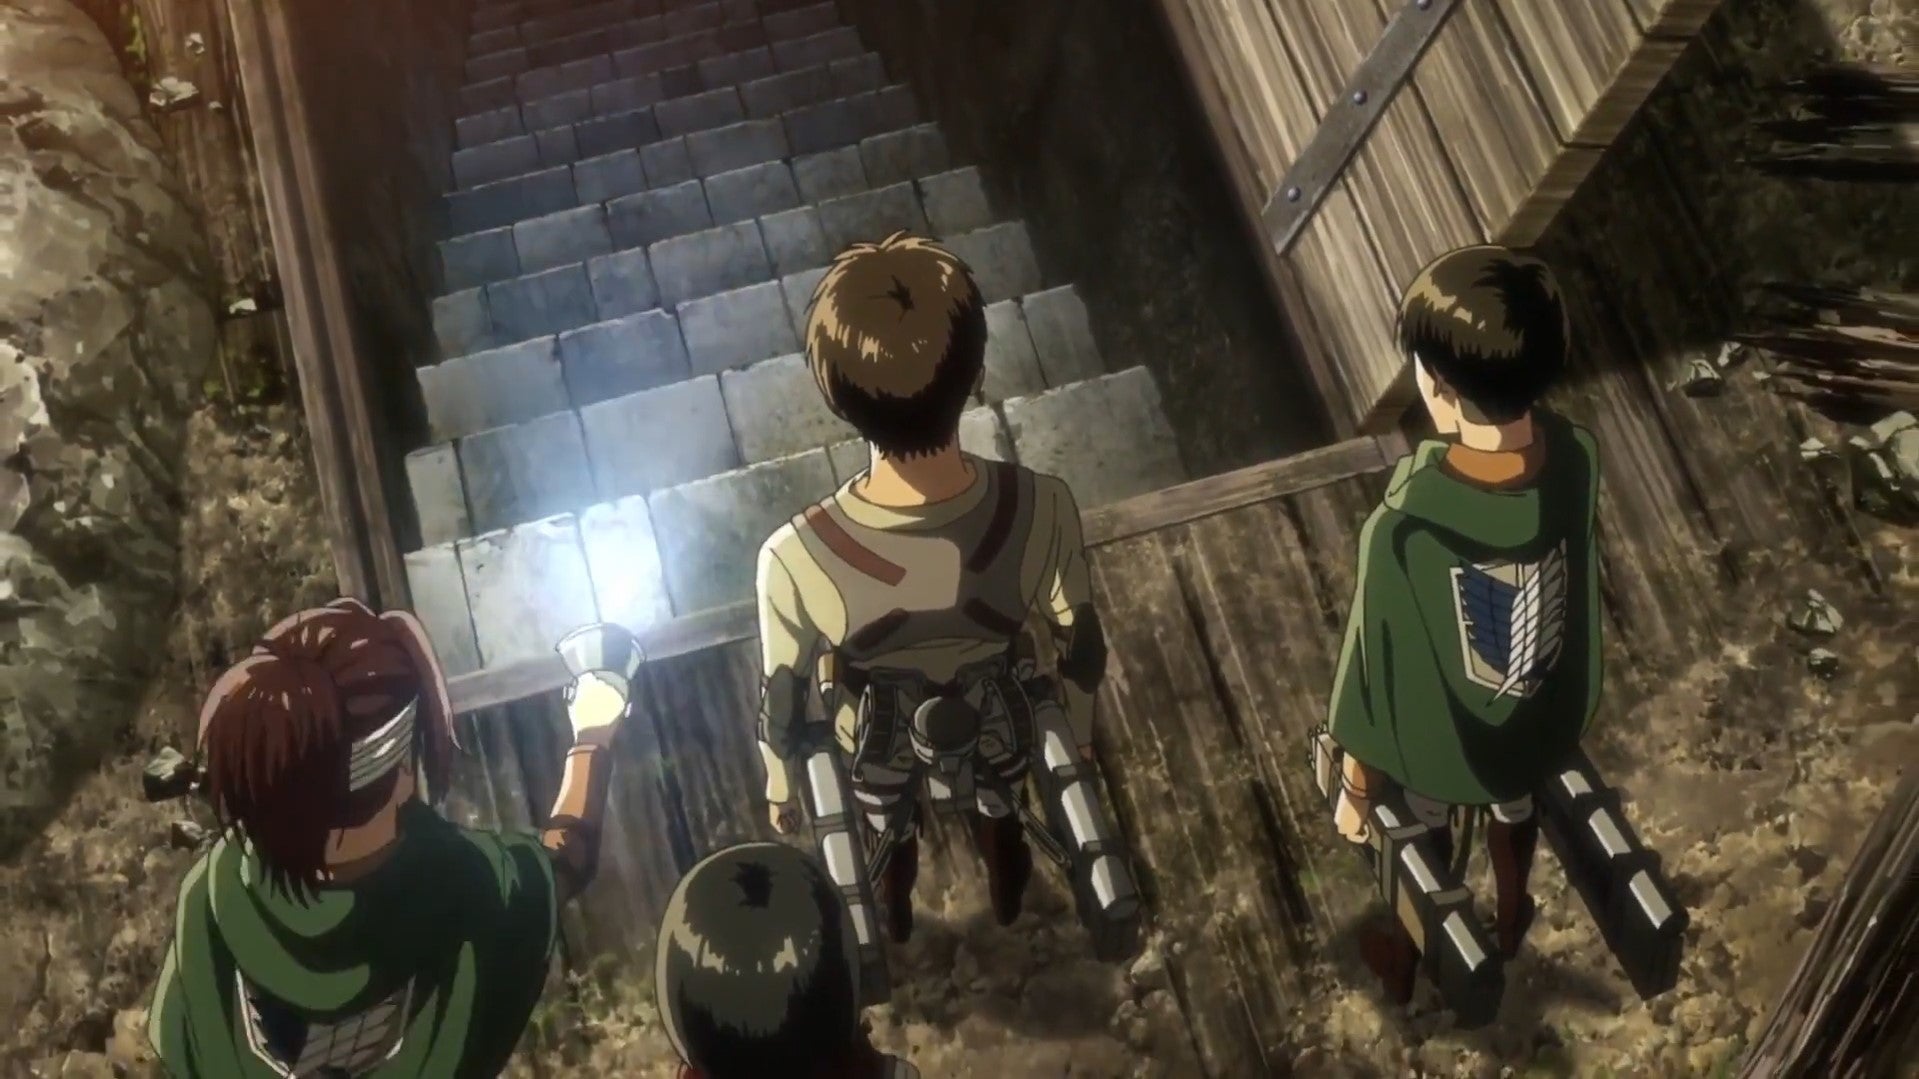 Attack On Titan The Basement The Scouts Reach The Basement